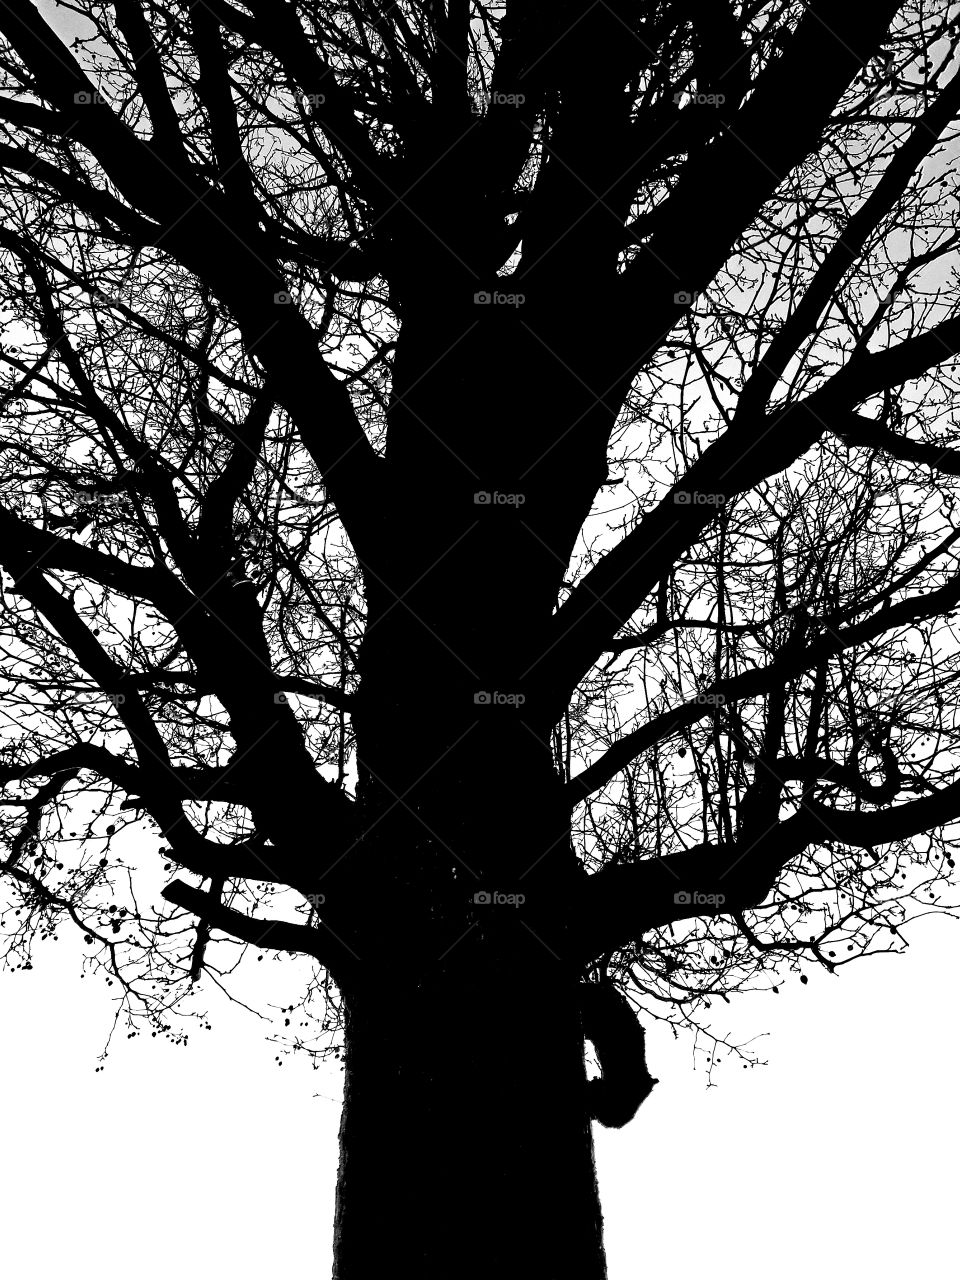 A tree photographed in silhouette at dusk during the barren winter months and then edited in black and white.